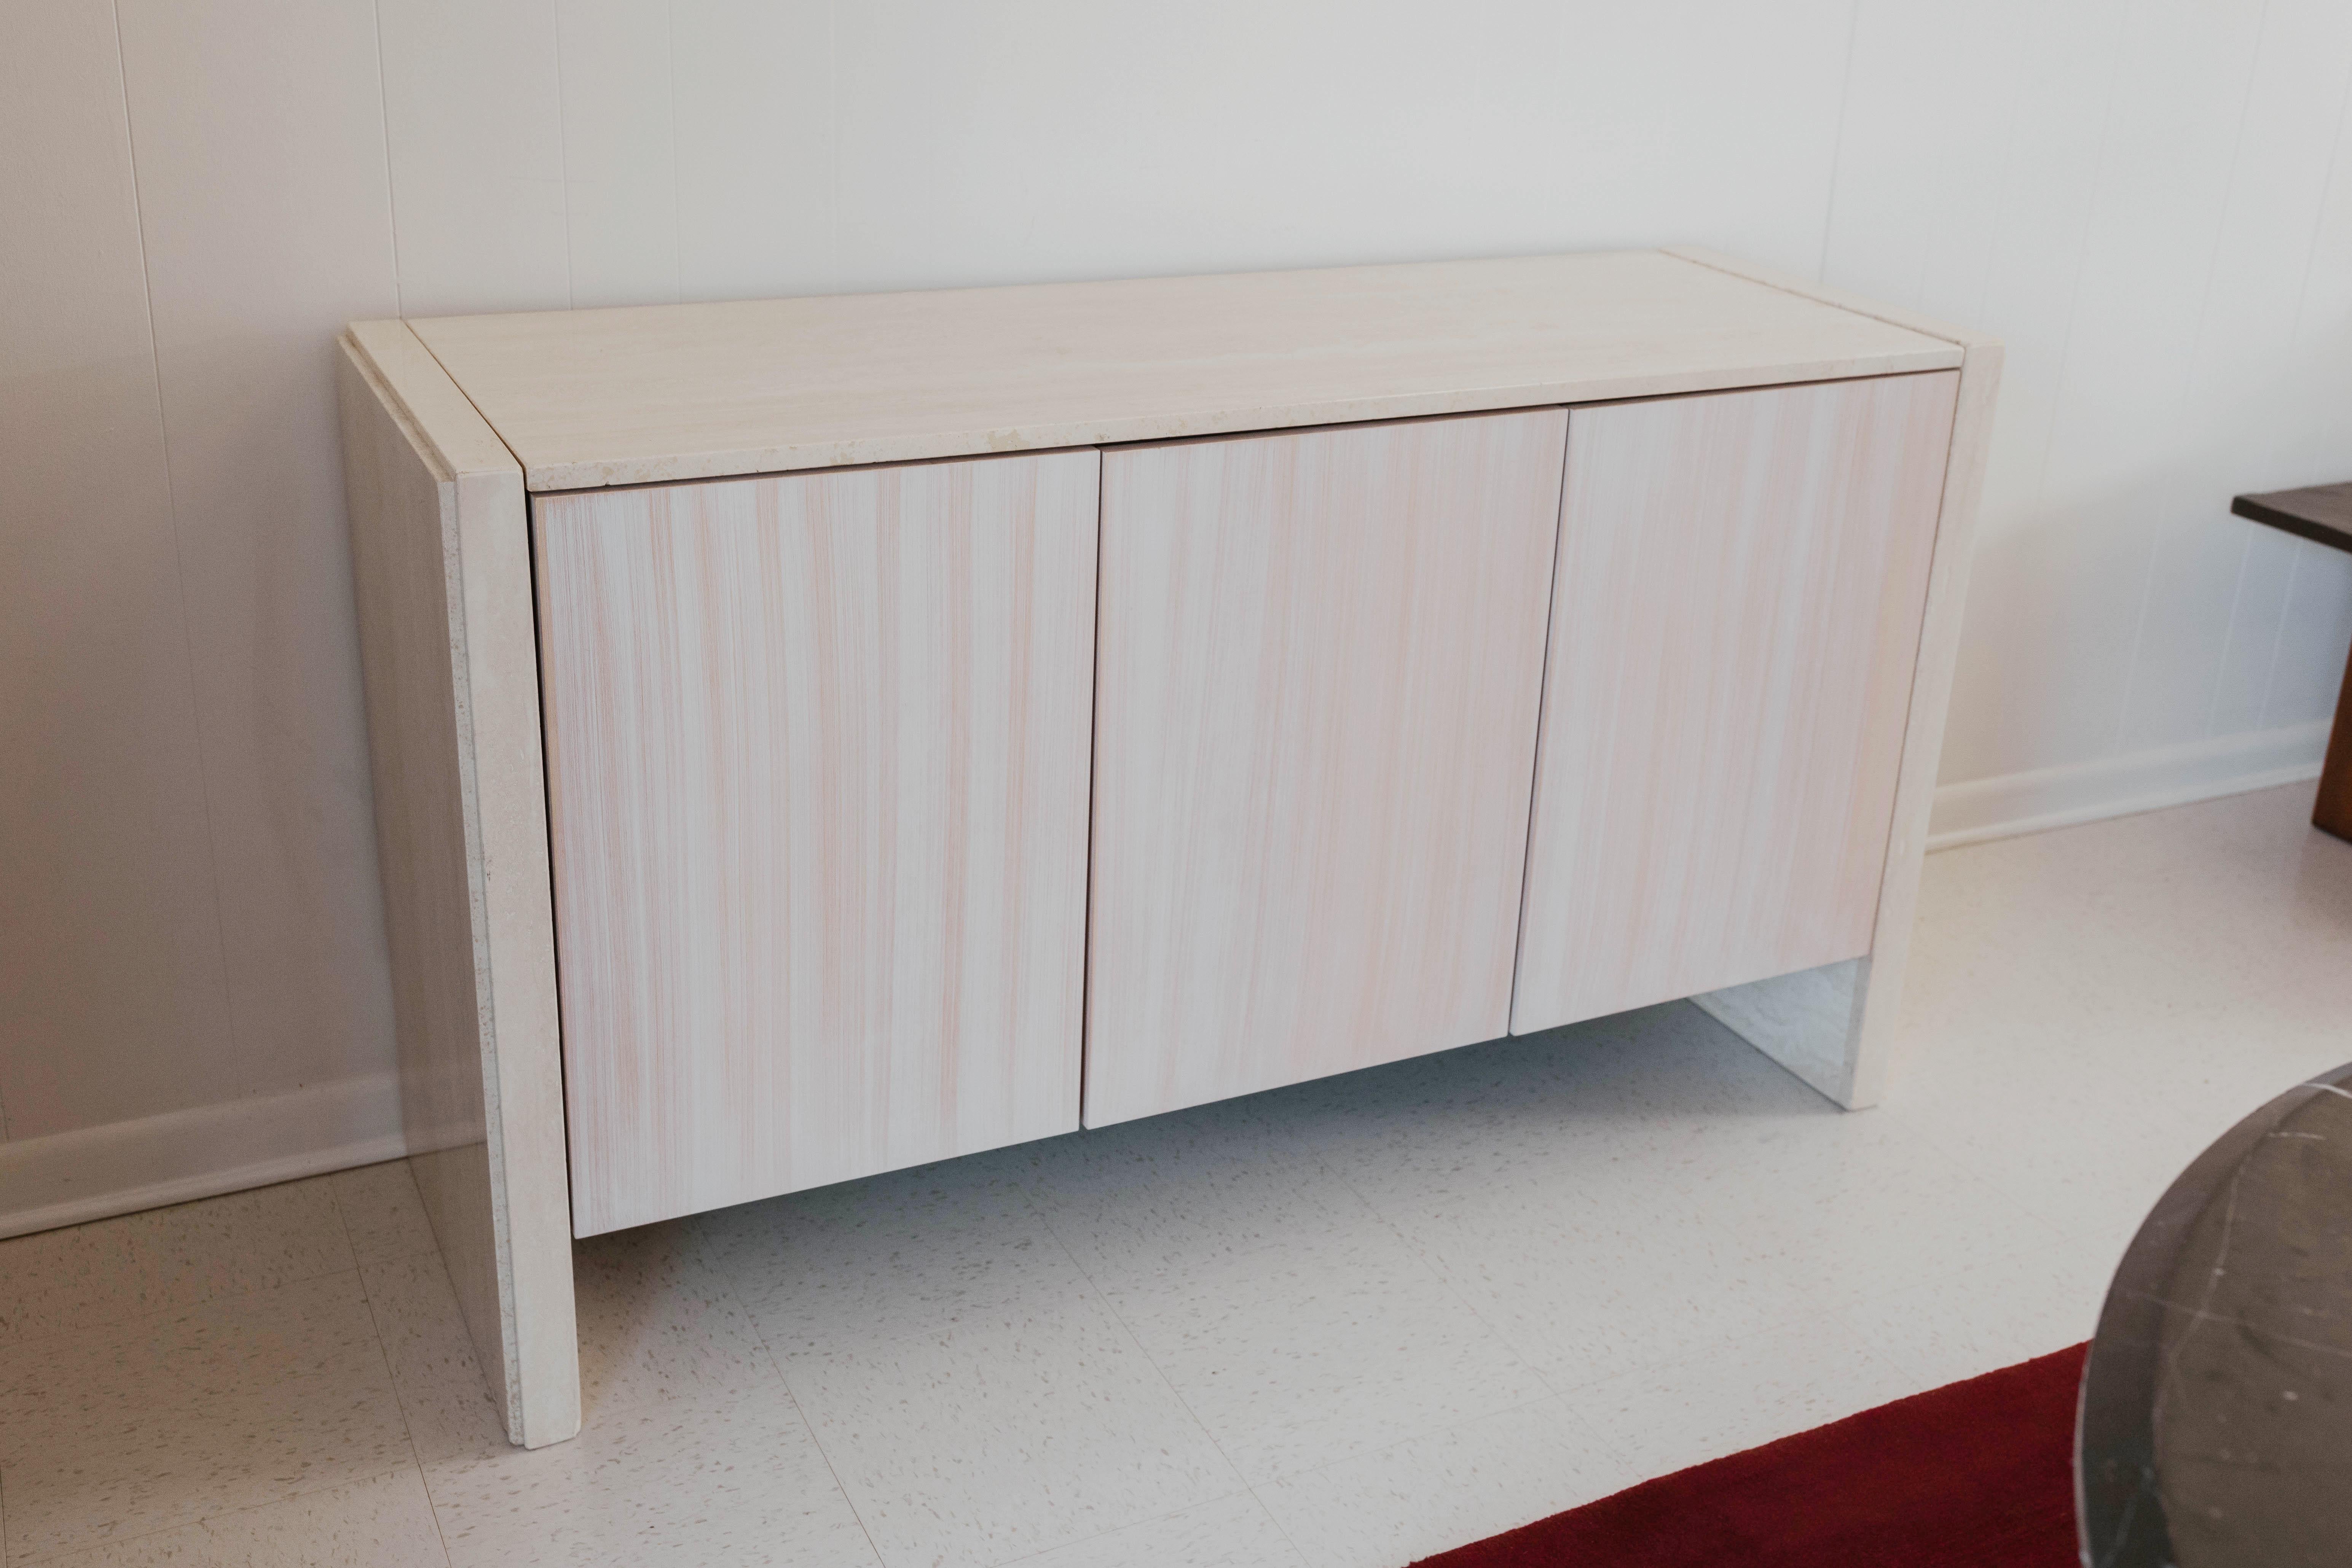 An incredibly stylish travertine sideboard credenza by Stone International S.p.A., this example is signed with its original Stone International label. 

With so few Travertine sideboards out there and with Travertine dining tables being such a hot